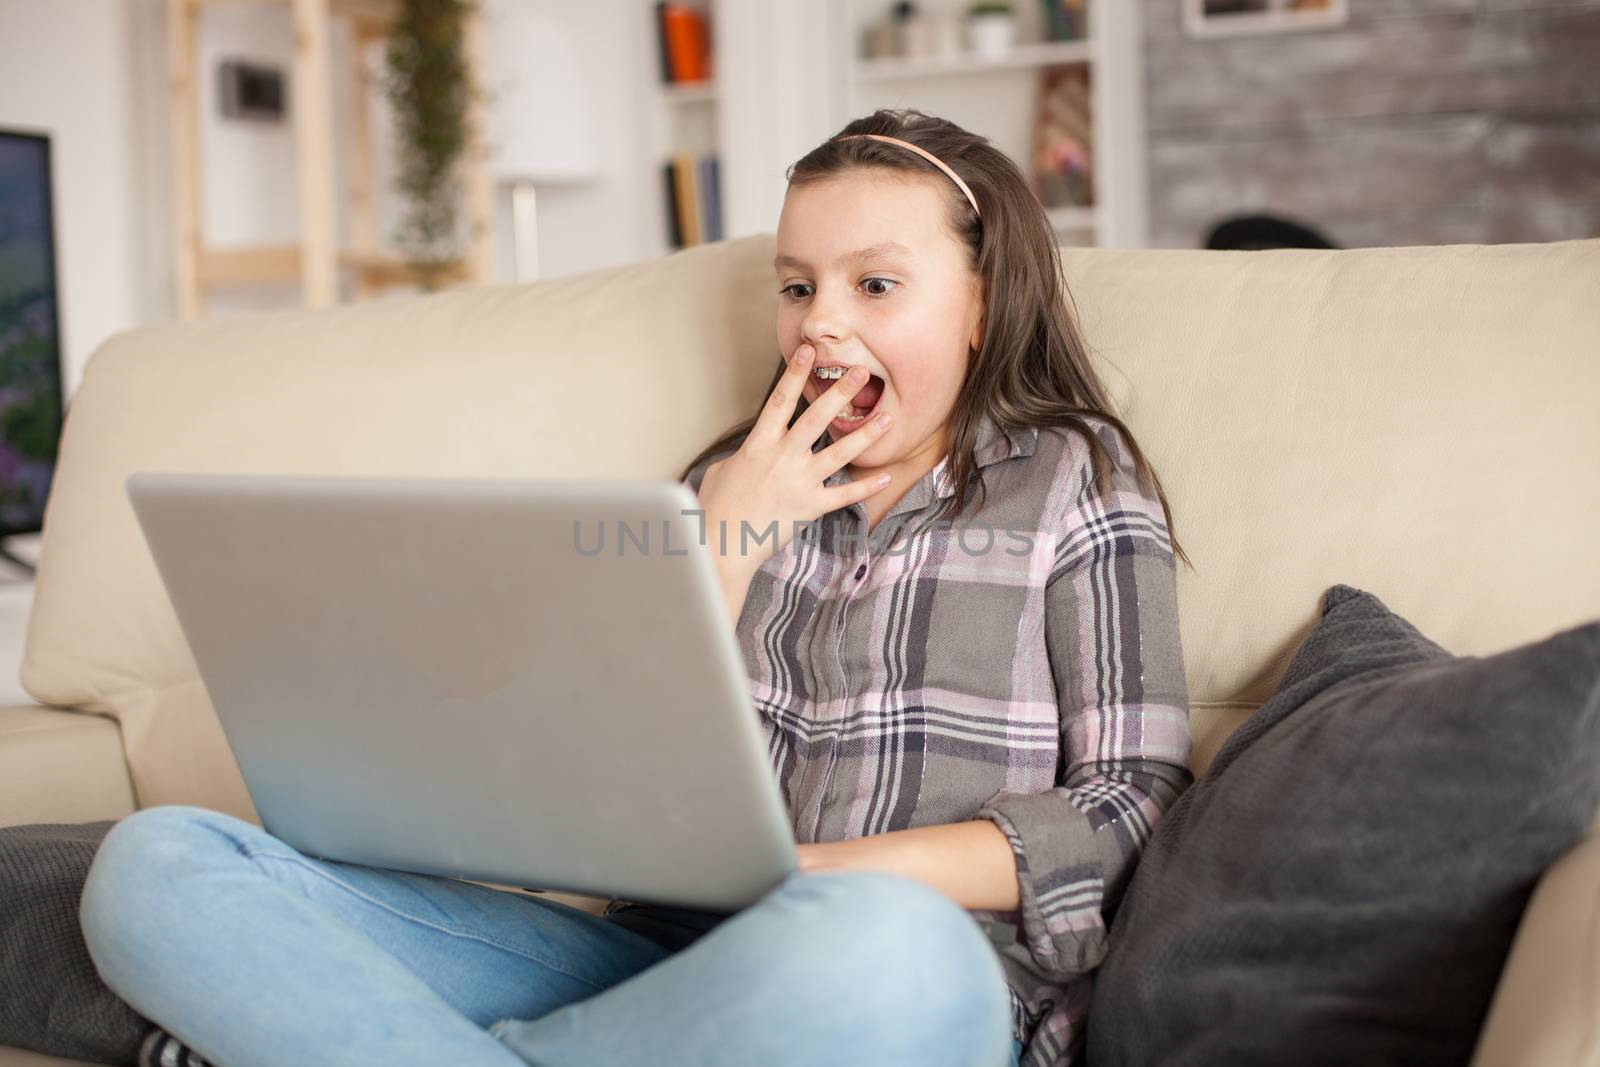 Excited little girl with braces while using her laptop sitting on the couch in living room.